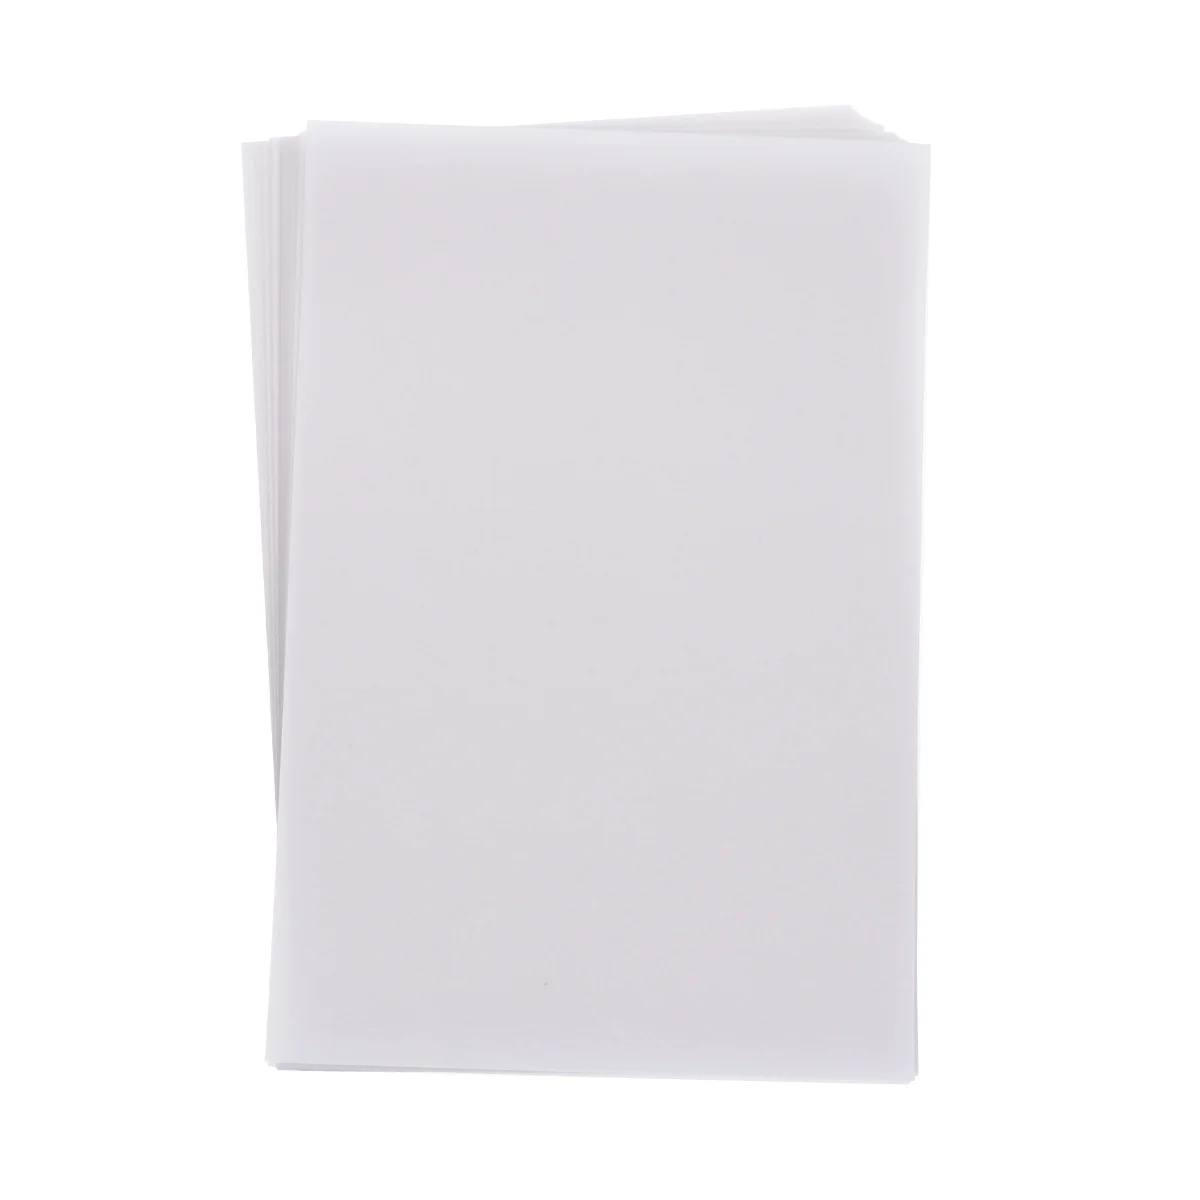 Sketching Paper Engineering Drawing Paper Comic Paper Translucent Paper Sketching Sketching Paper Tracing Paper Pad